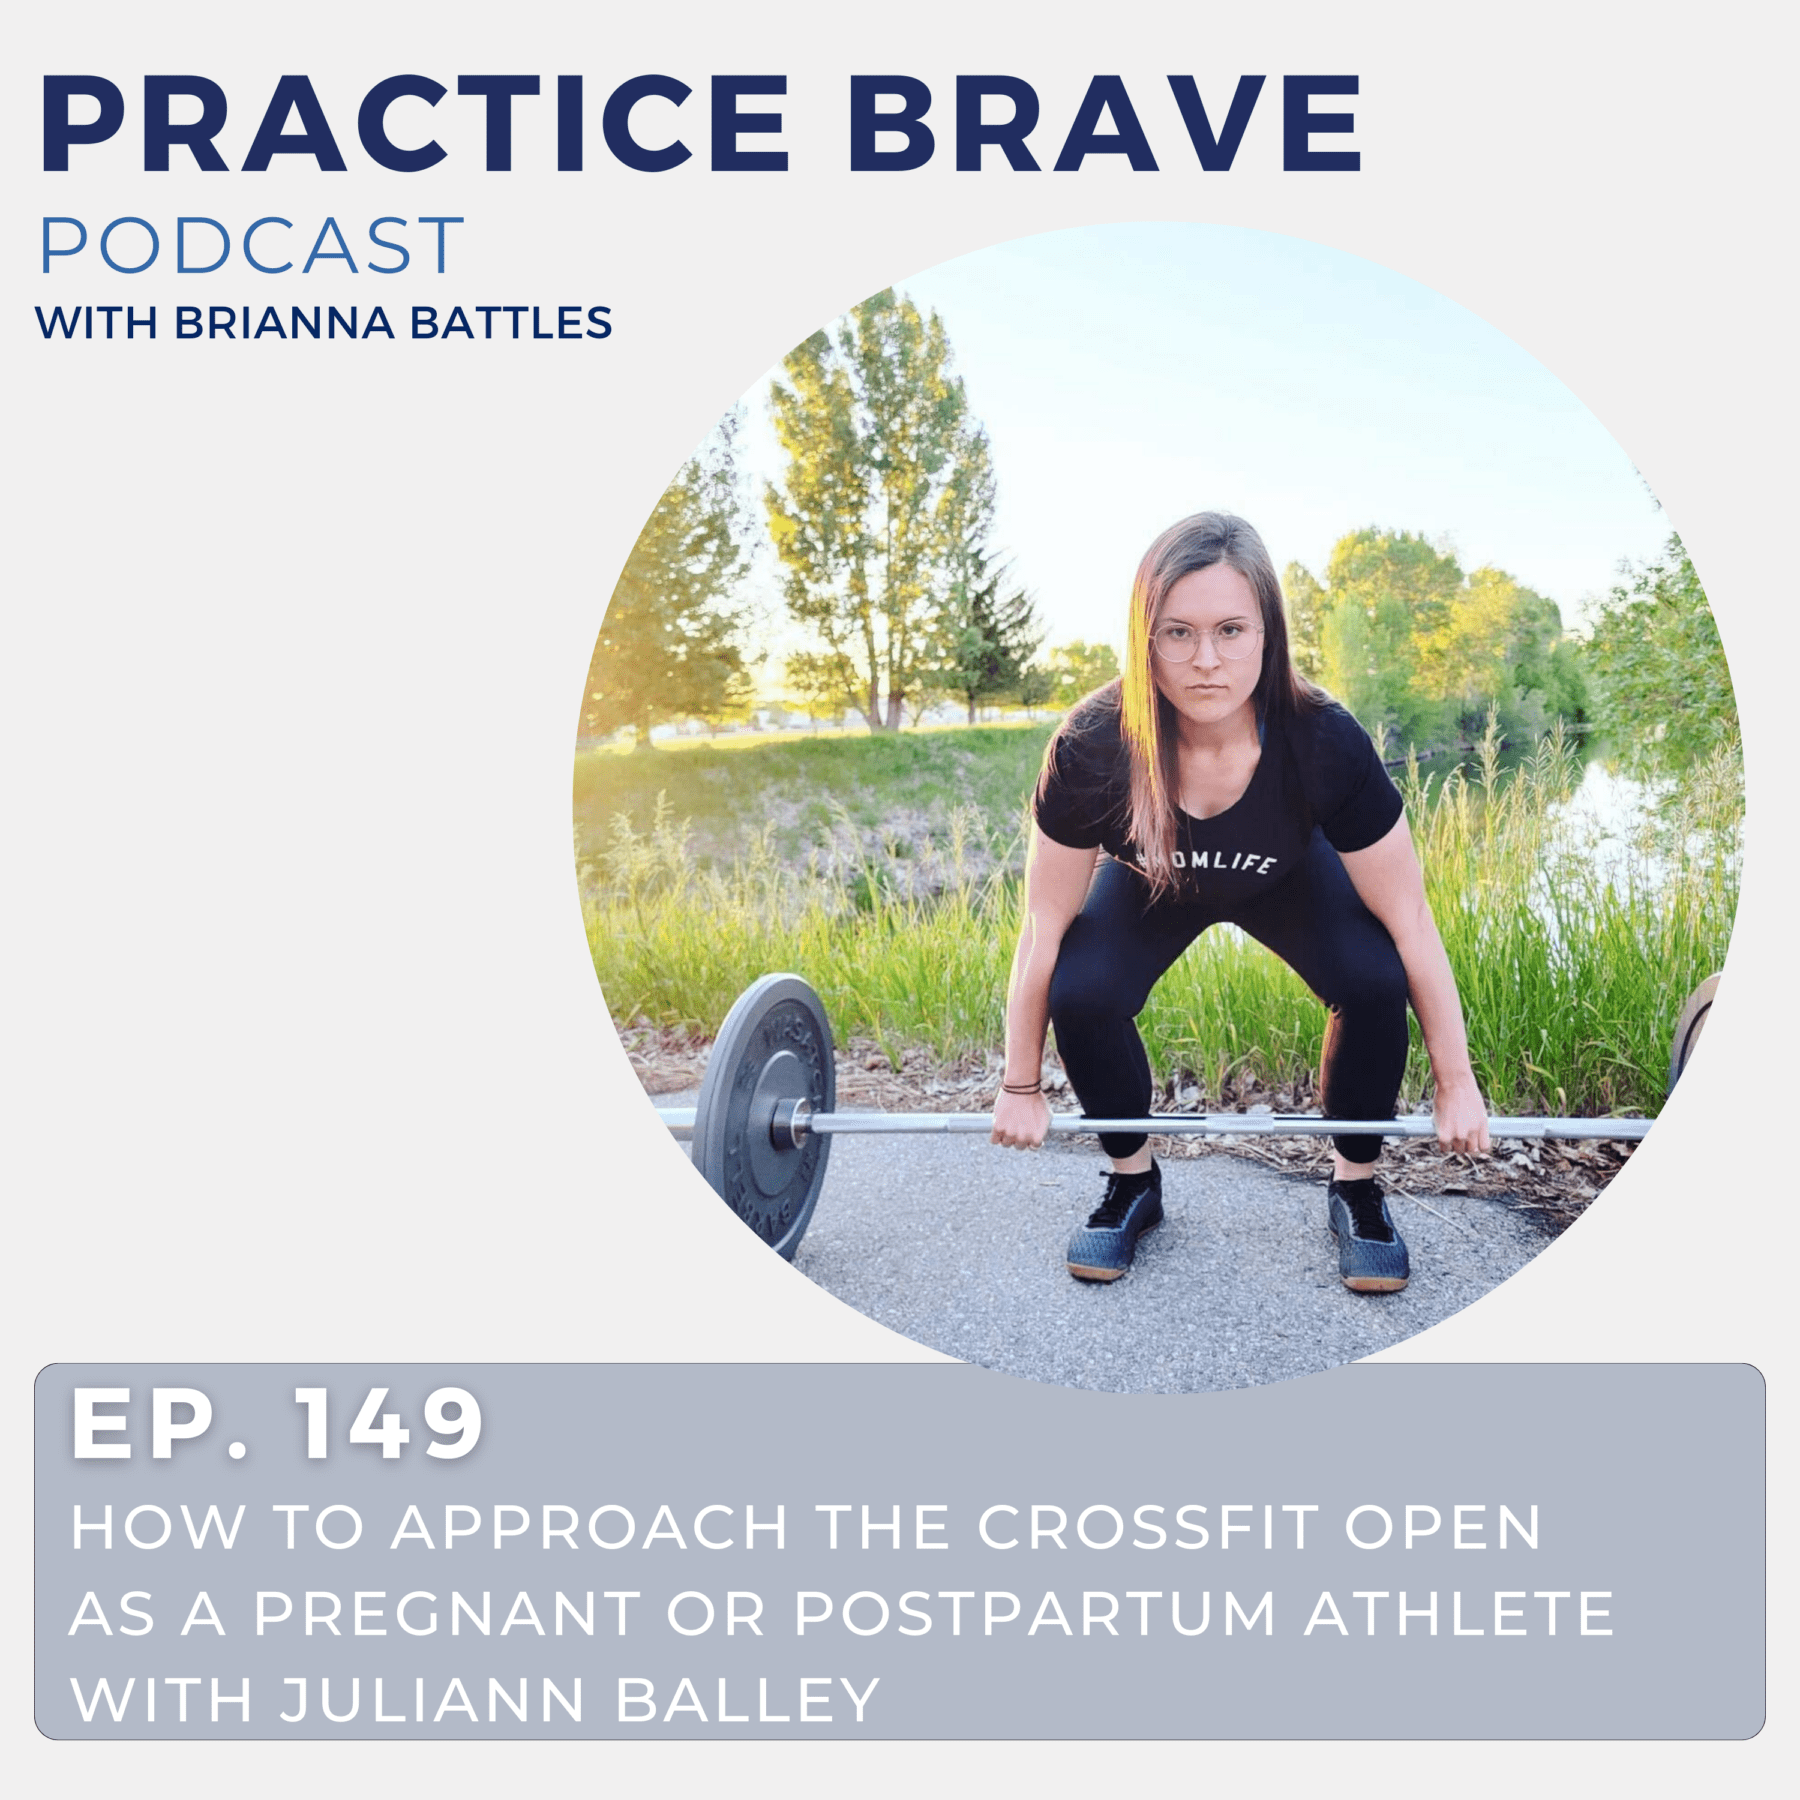 149 - How to Approach the CrossFit Open as a Pregnant or Postpartum Athlete with Juliann Balley - Practice Brave with Brianna Battles